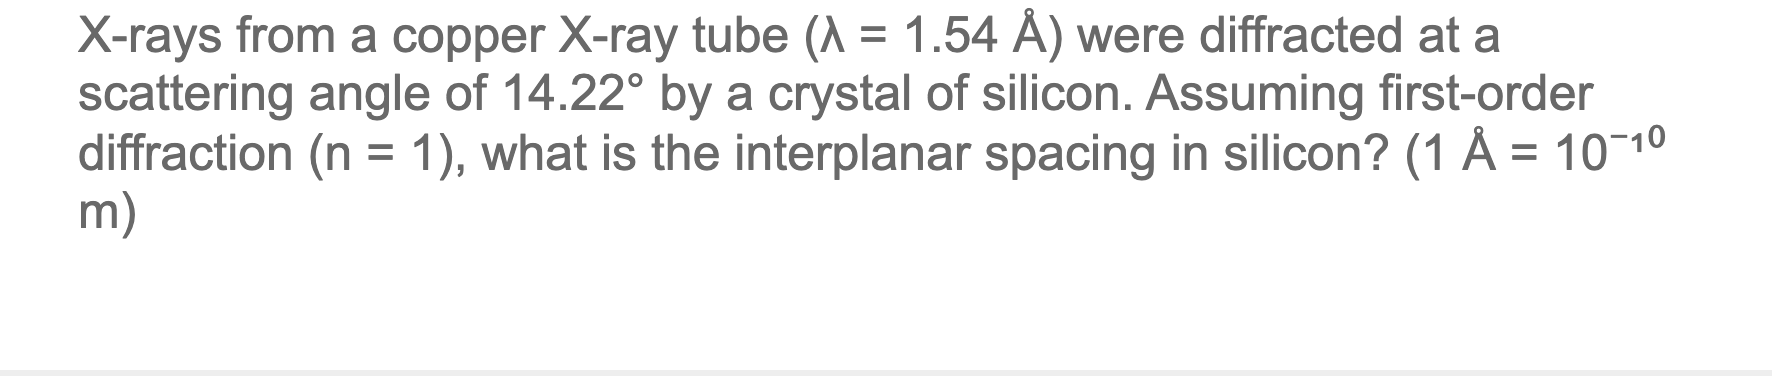 X-rays from a copper X-ray tube (A = 1.54 Å) were diffracted at a
scattering angle of 14.22° by a crystal of silicon. Assuming first-order
diffraction (n = 1), what is the interplanar spacing in silicon? (1 Å = 10¬10
m)
%3D
